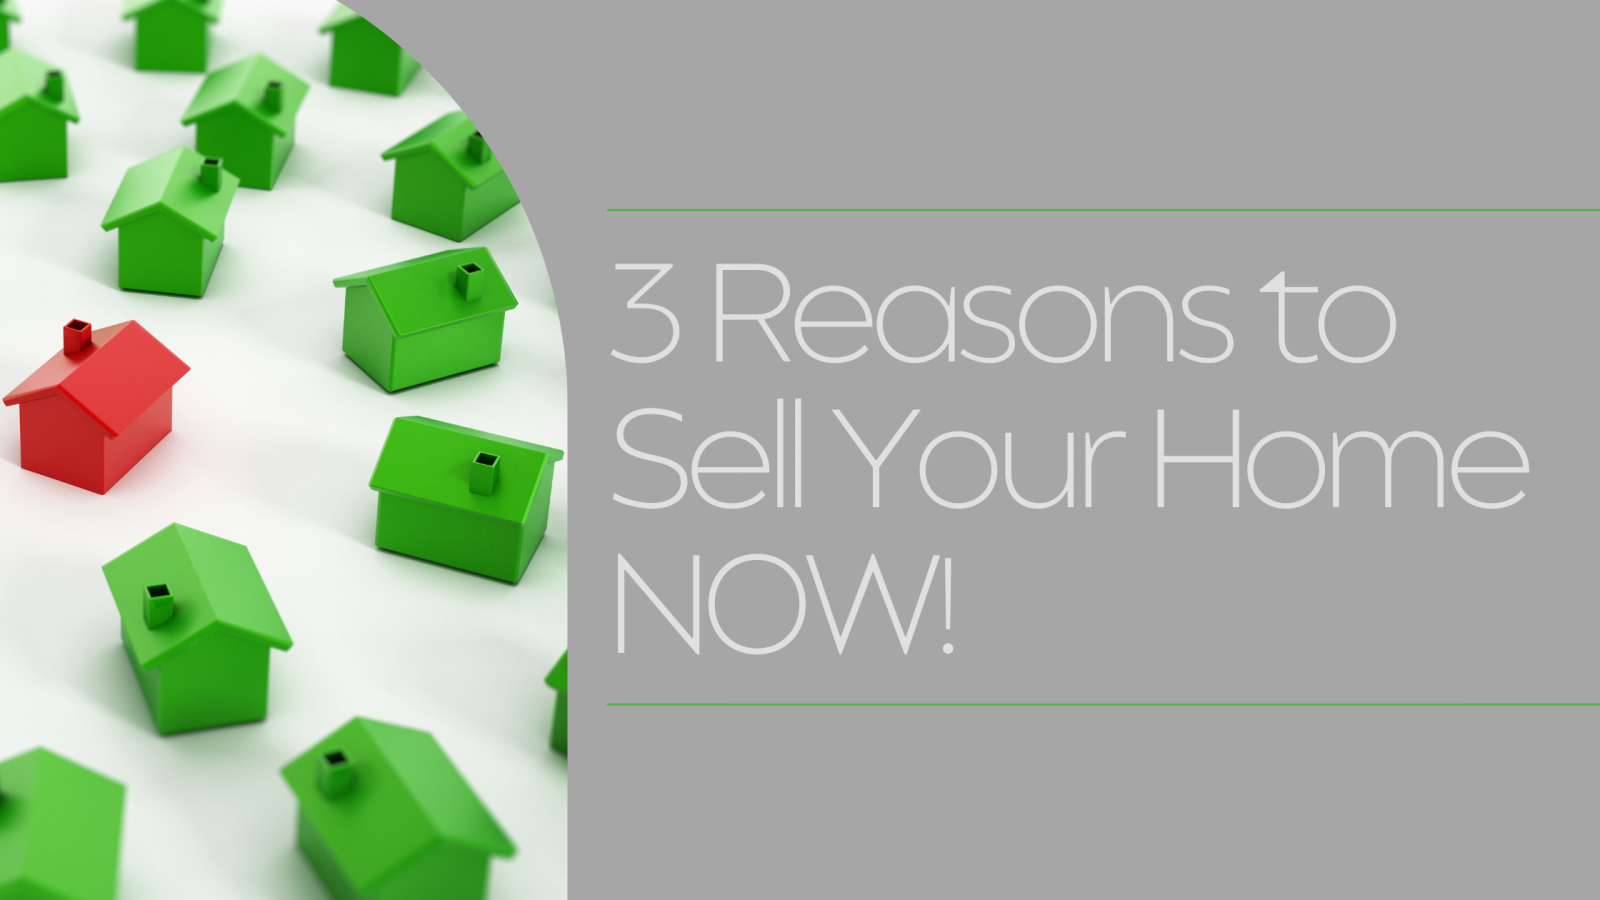 3 Reasons to Sell Your Home NOW The Vince Carter Team at Carter